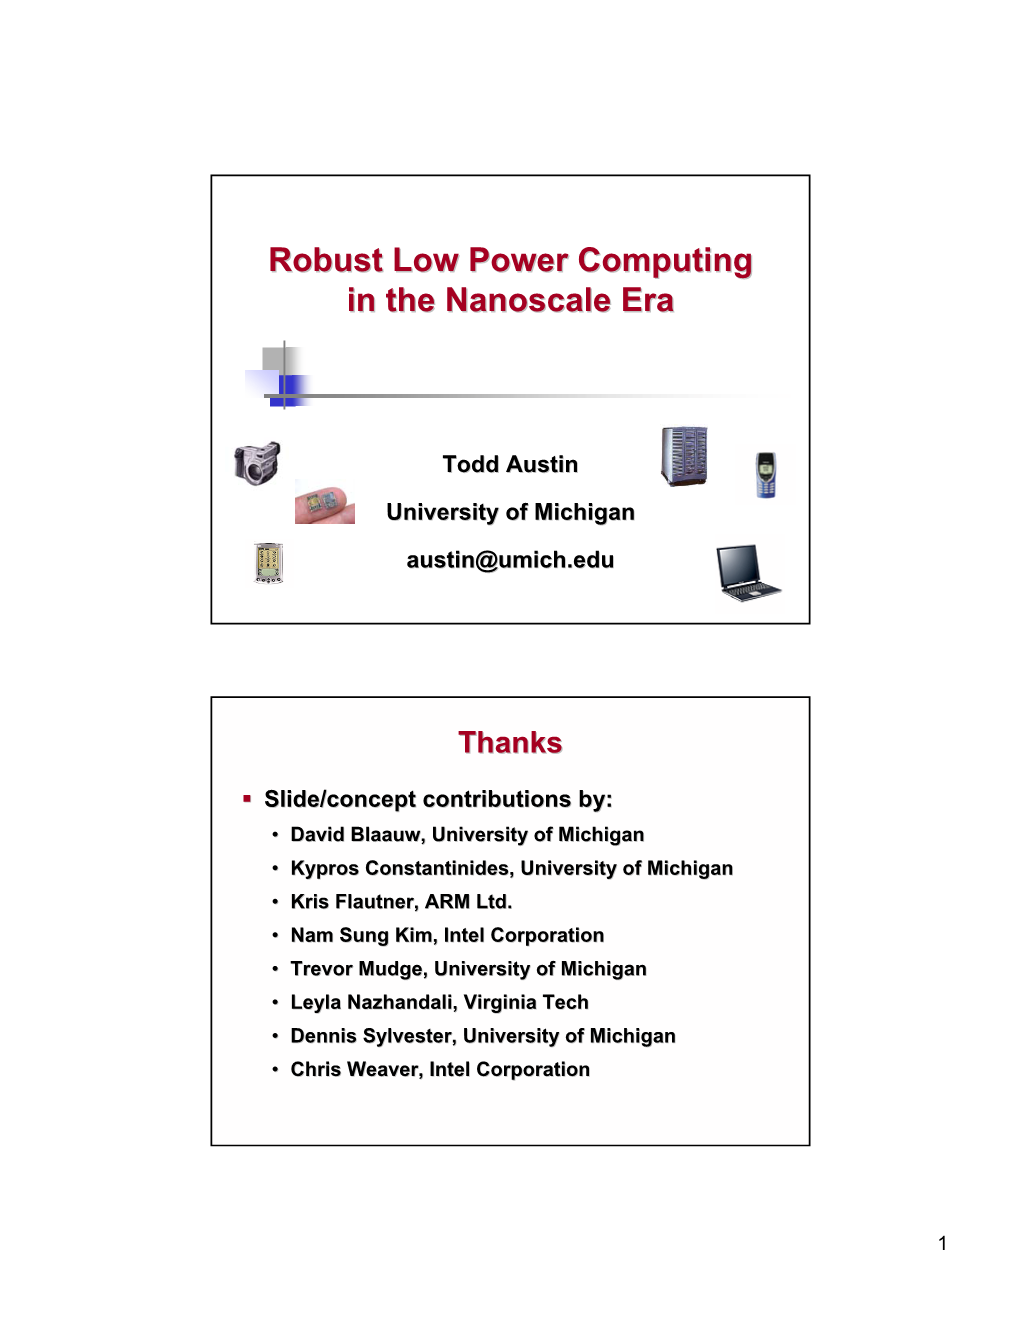 Robust Low Power Computing in the Nanoscale Era